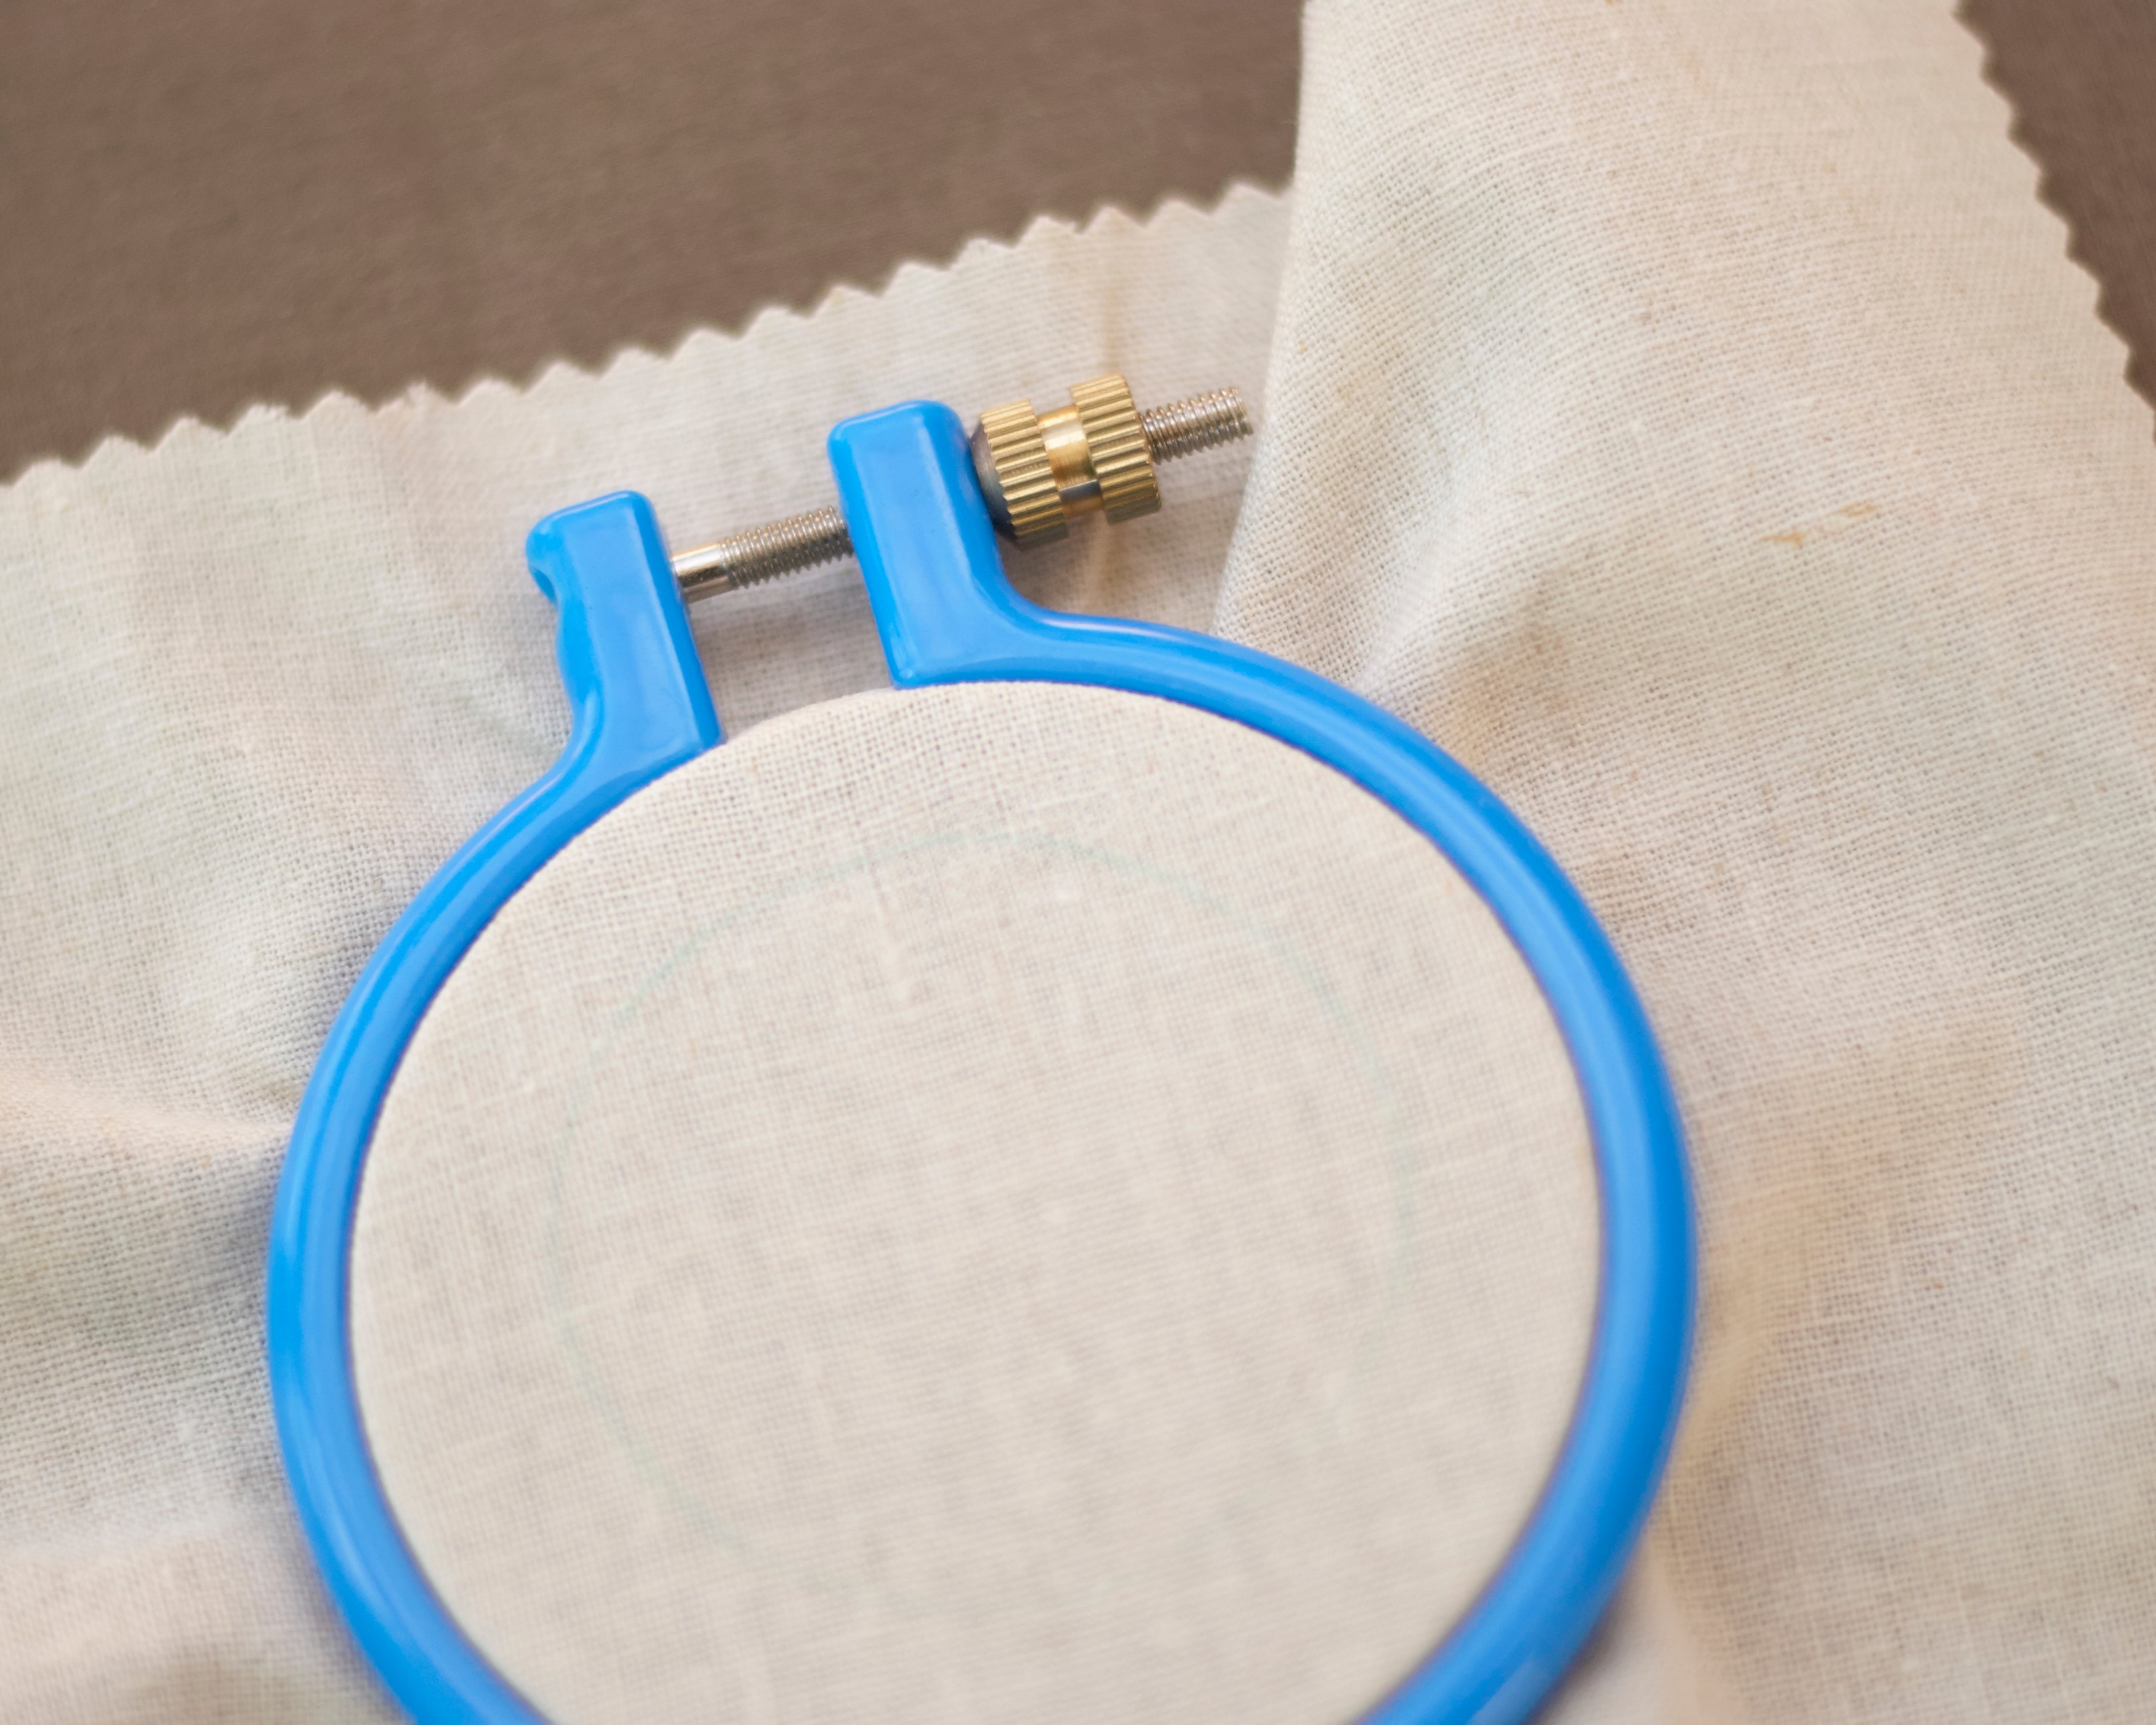 Setting up your embroidery hoop